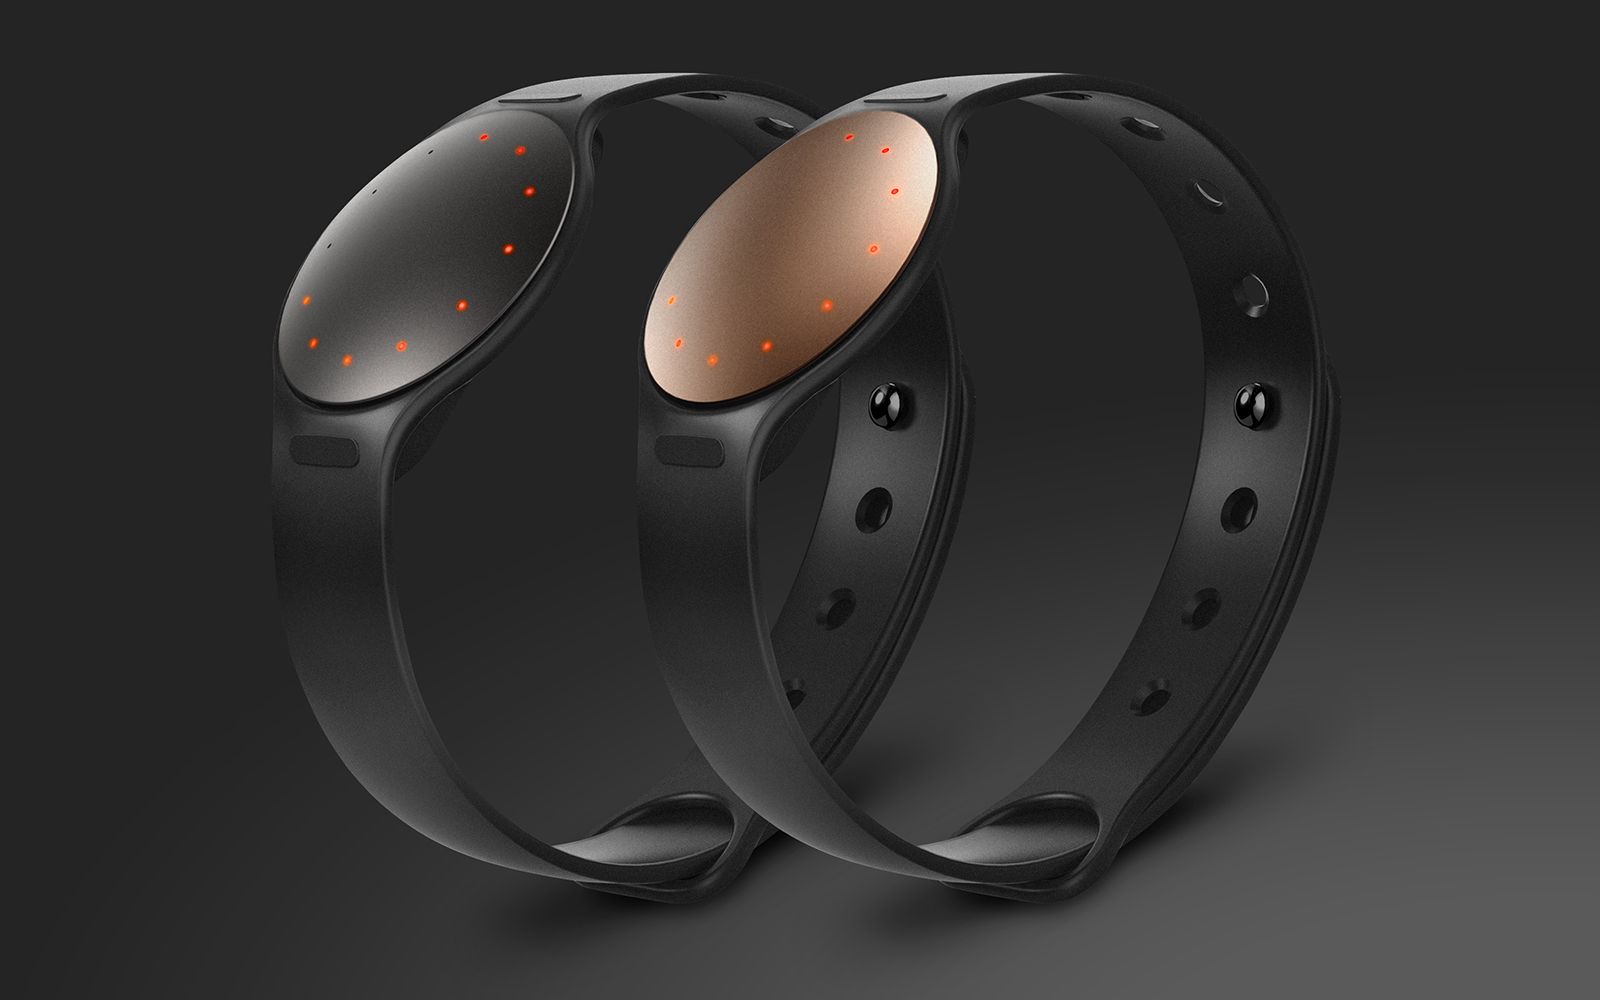 fossil buys misfit doesn t want to become a wearable dinosaur image 1